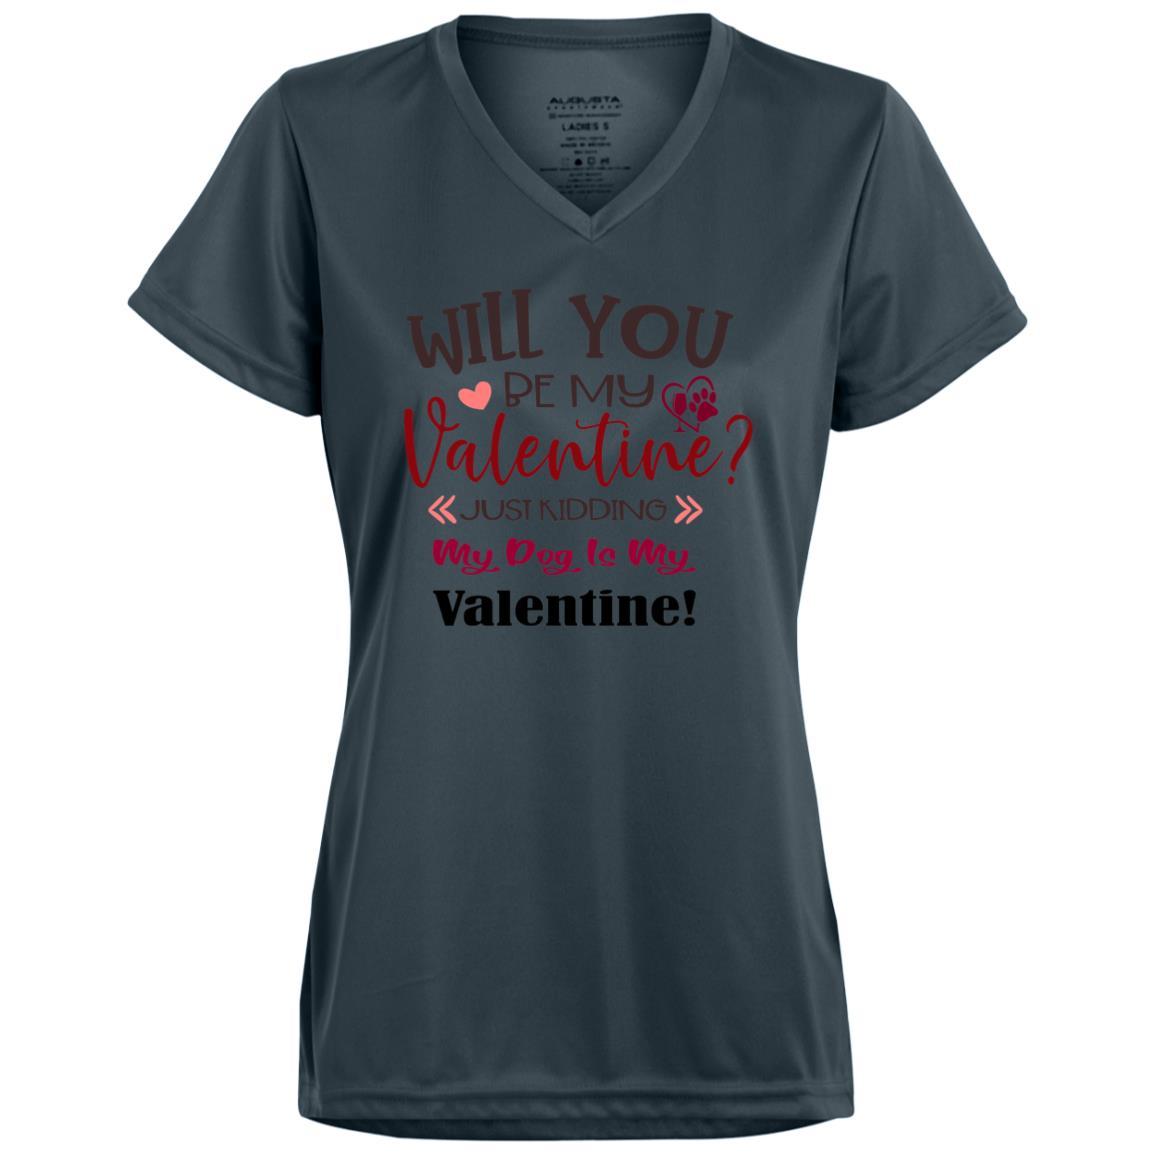 T-Shirts Graphite / X-Small Winey Bitches Co  "Will You Be My Valentine, just kidding My Dog Is My Valentine" Ladies' Wicking T-Shirt WineyBitchesCo